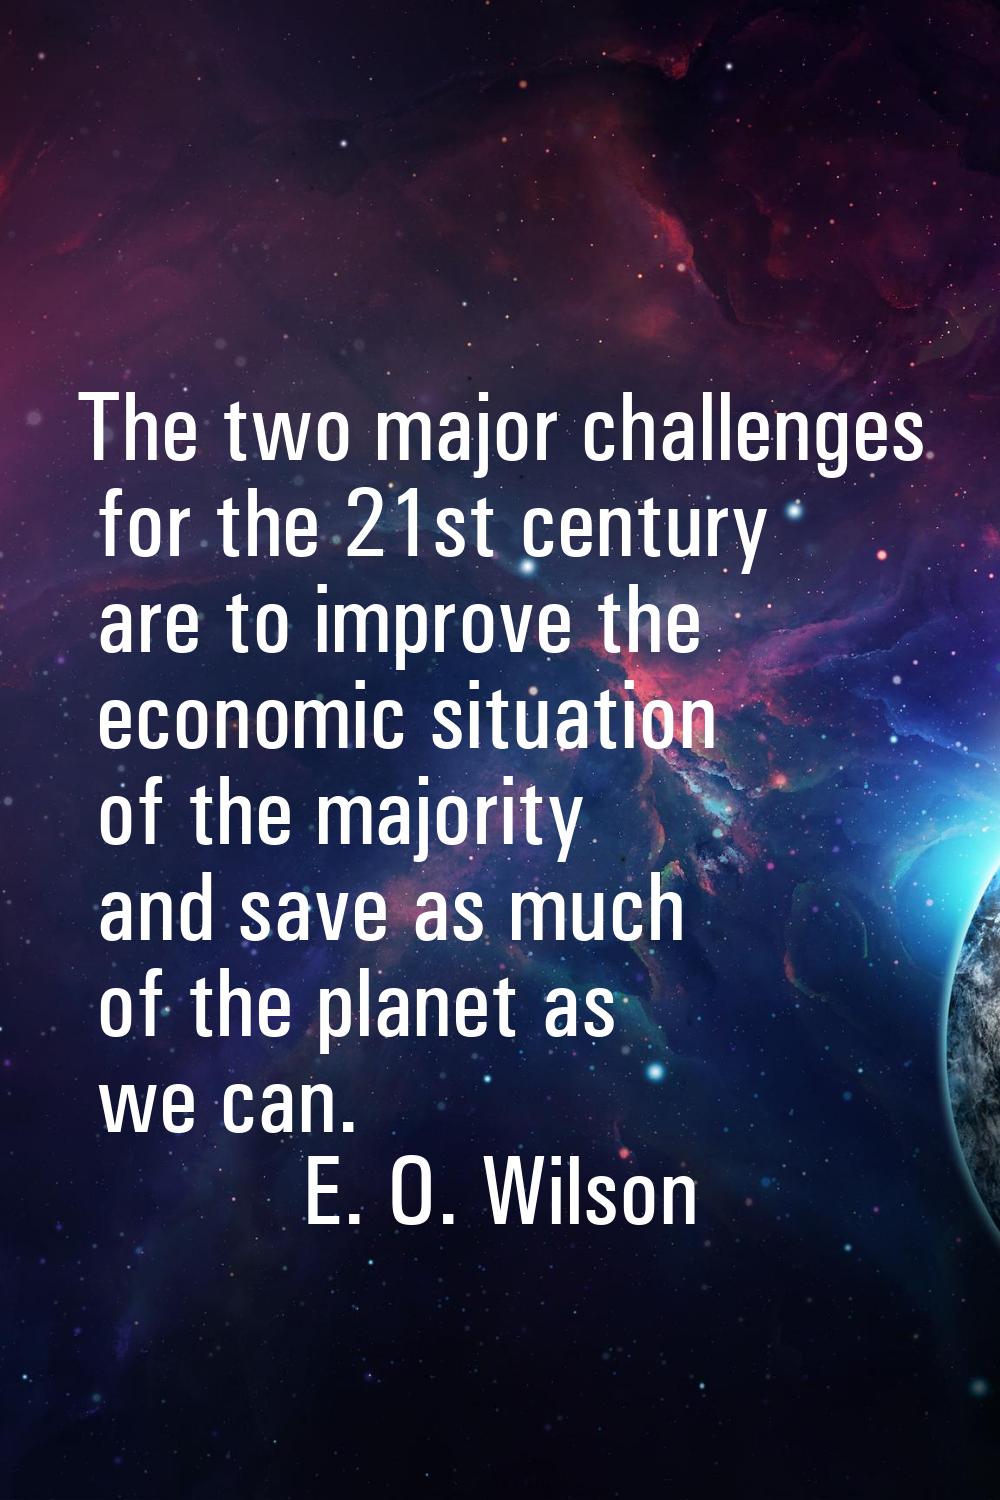 The two major challenges for the 21st century are to improve the economic situation of the majority